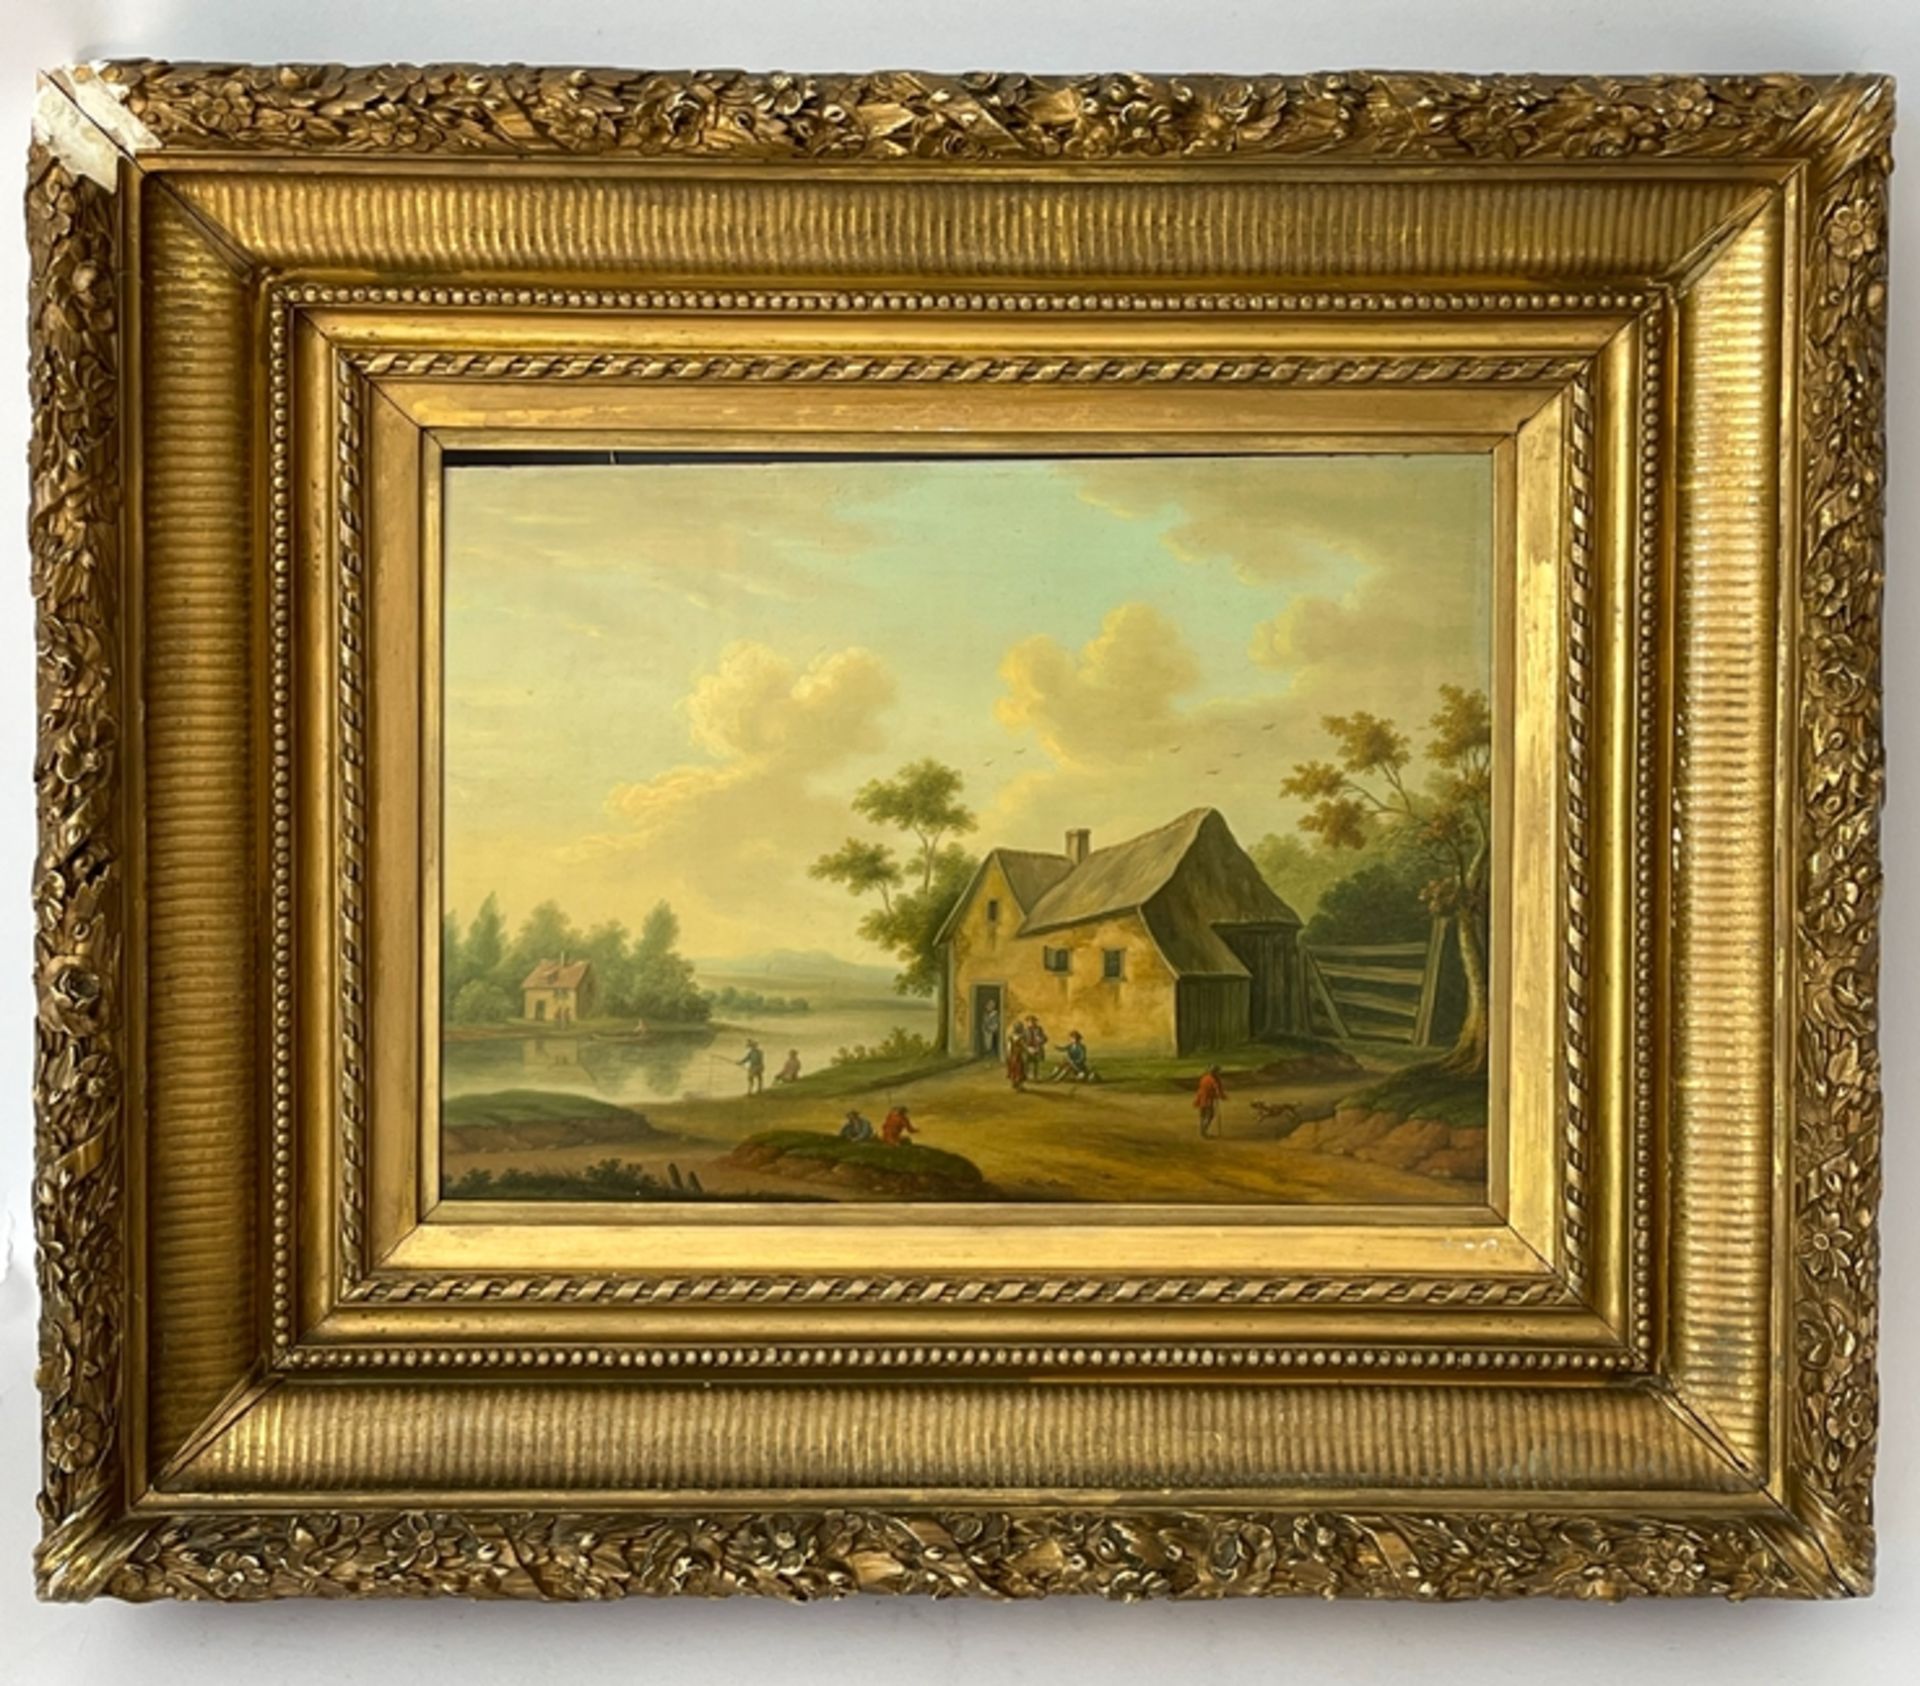 Landscape painting „house by the lake with people“